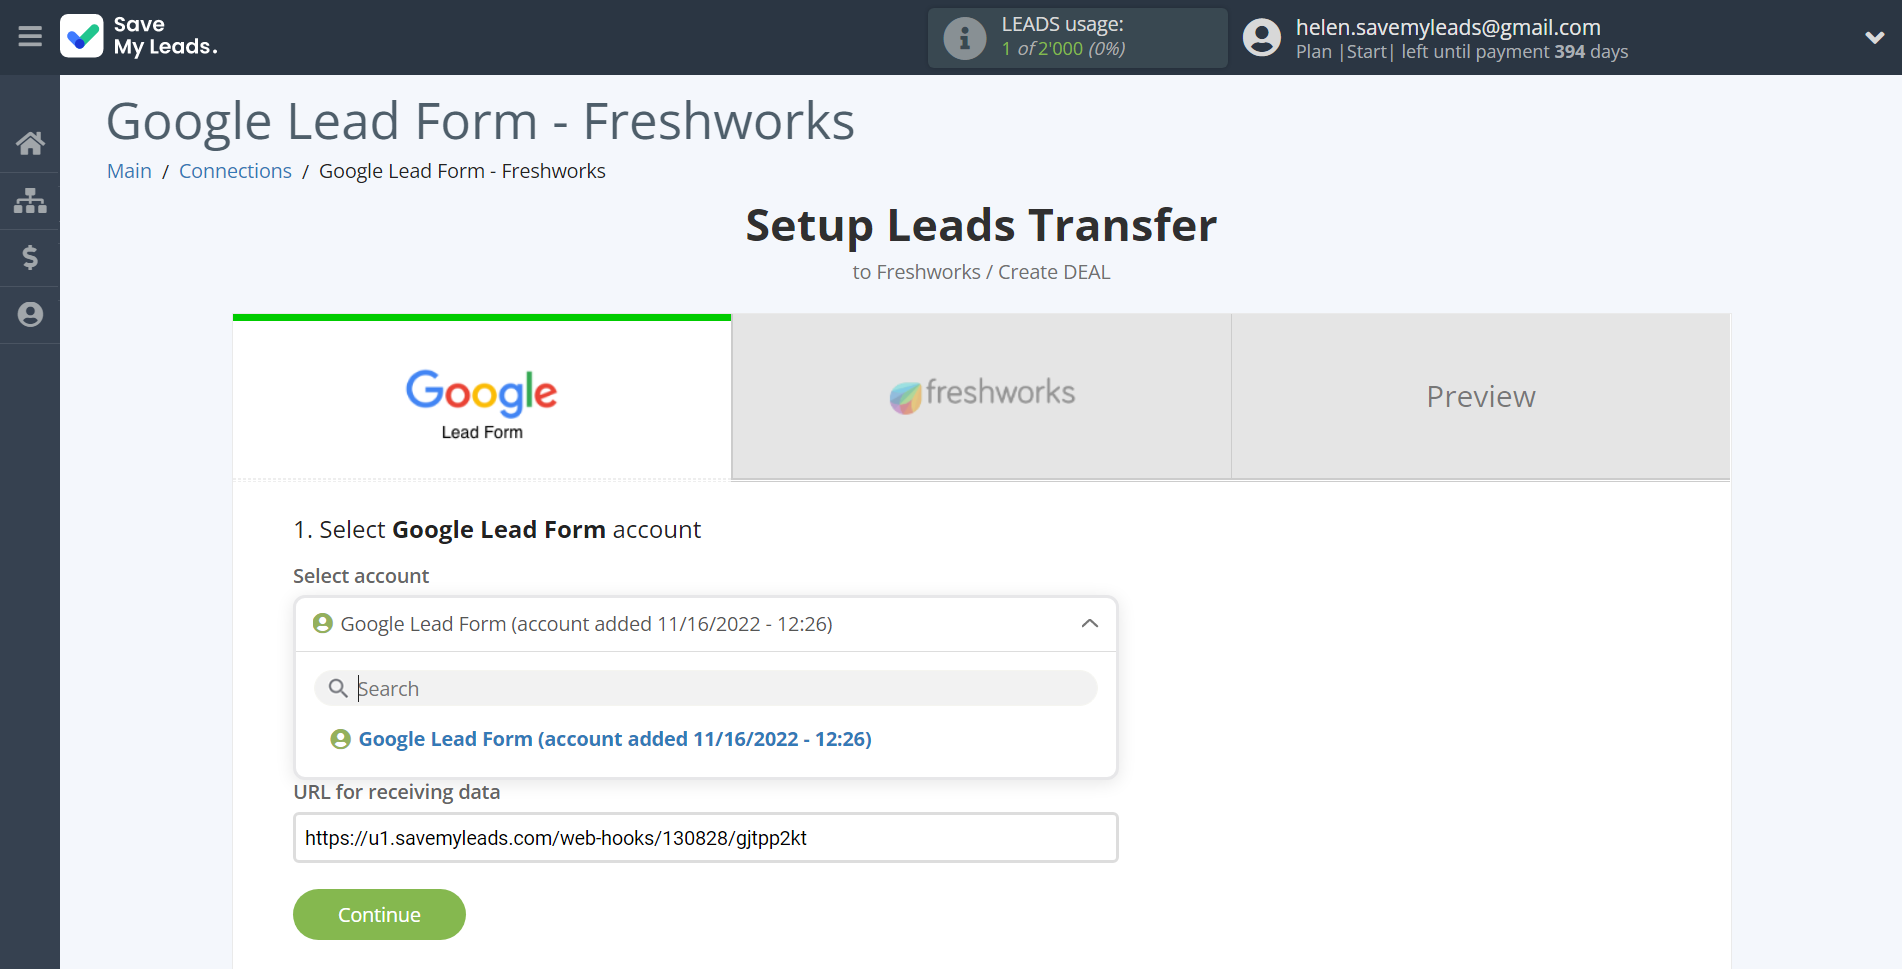 How to Connect Google Lead Form with Freshworks Create Deal | Data Source account selection